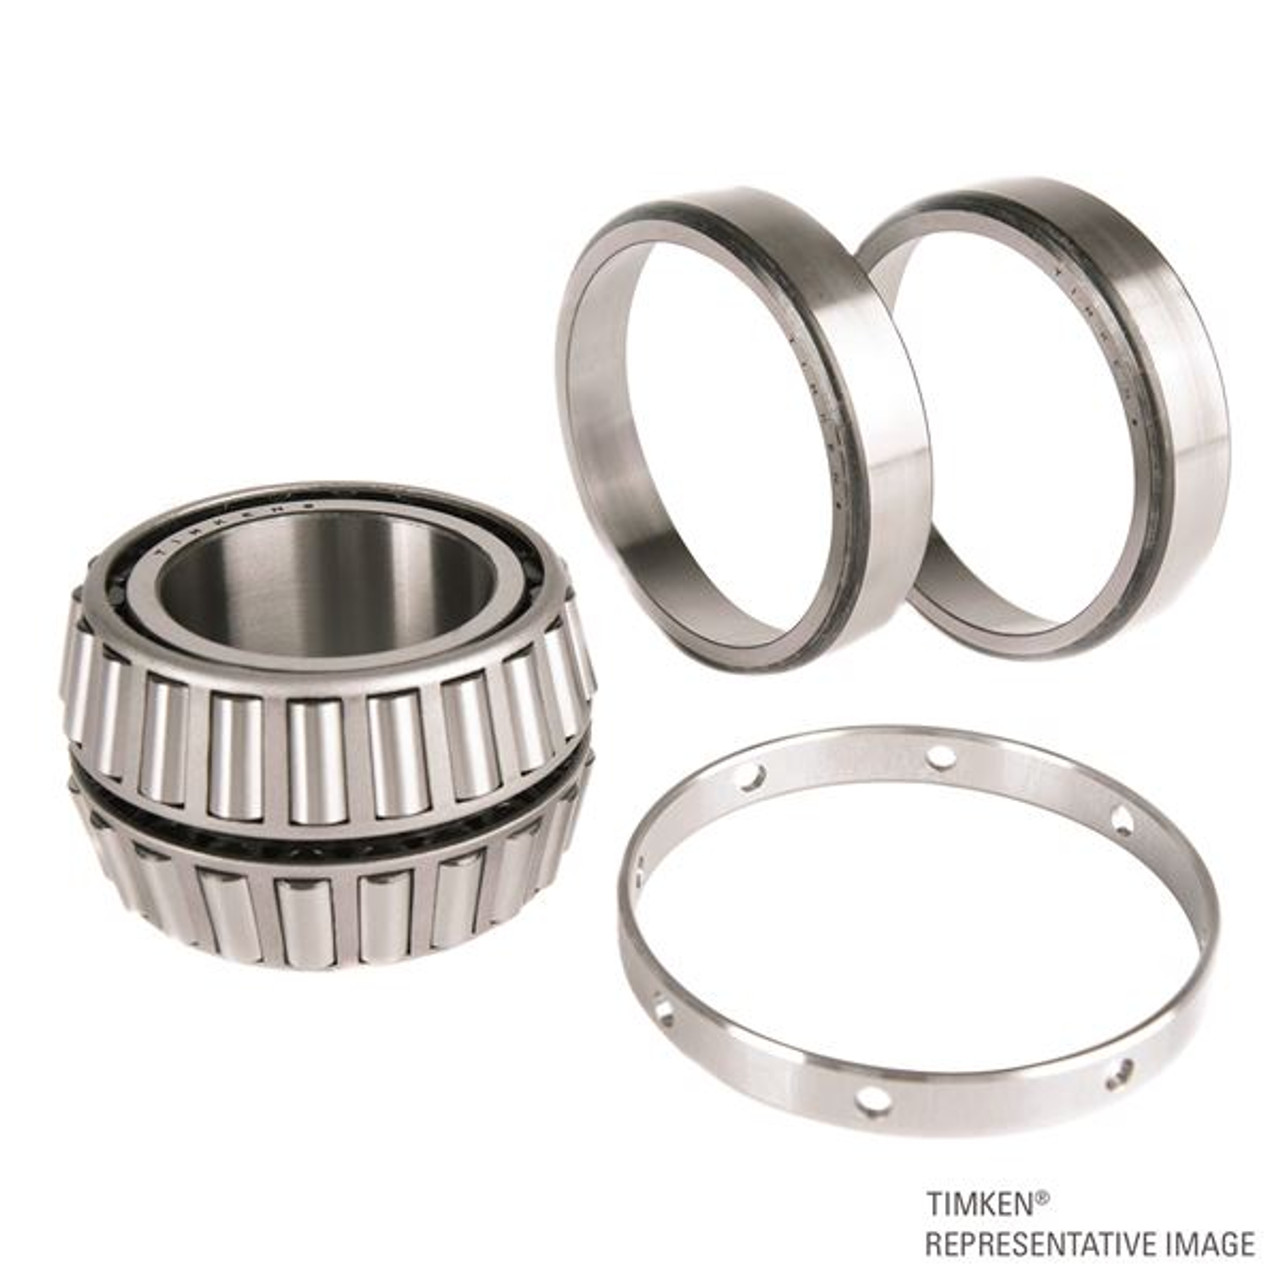 Timken® TDI Single Double Cone Assembly  NA483SW-90270